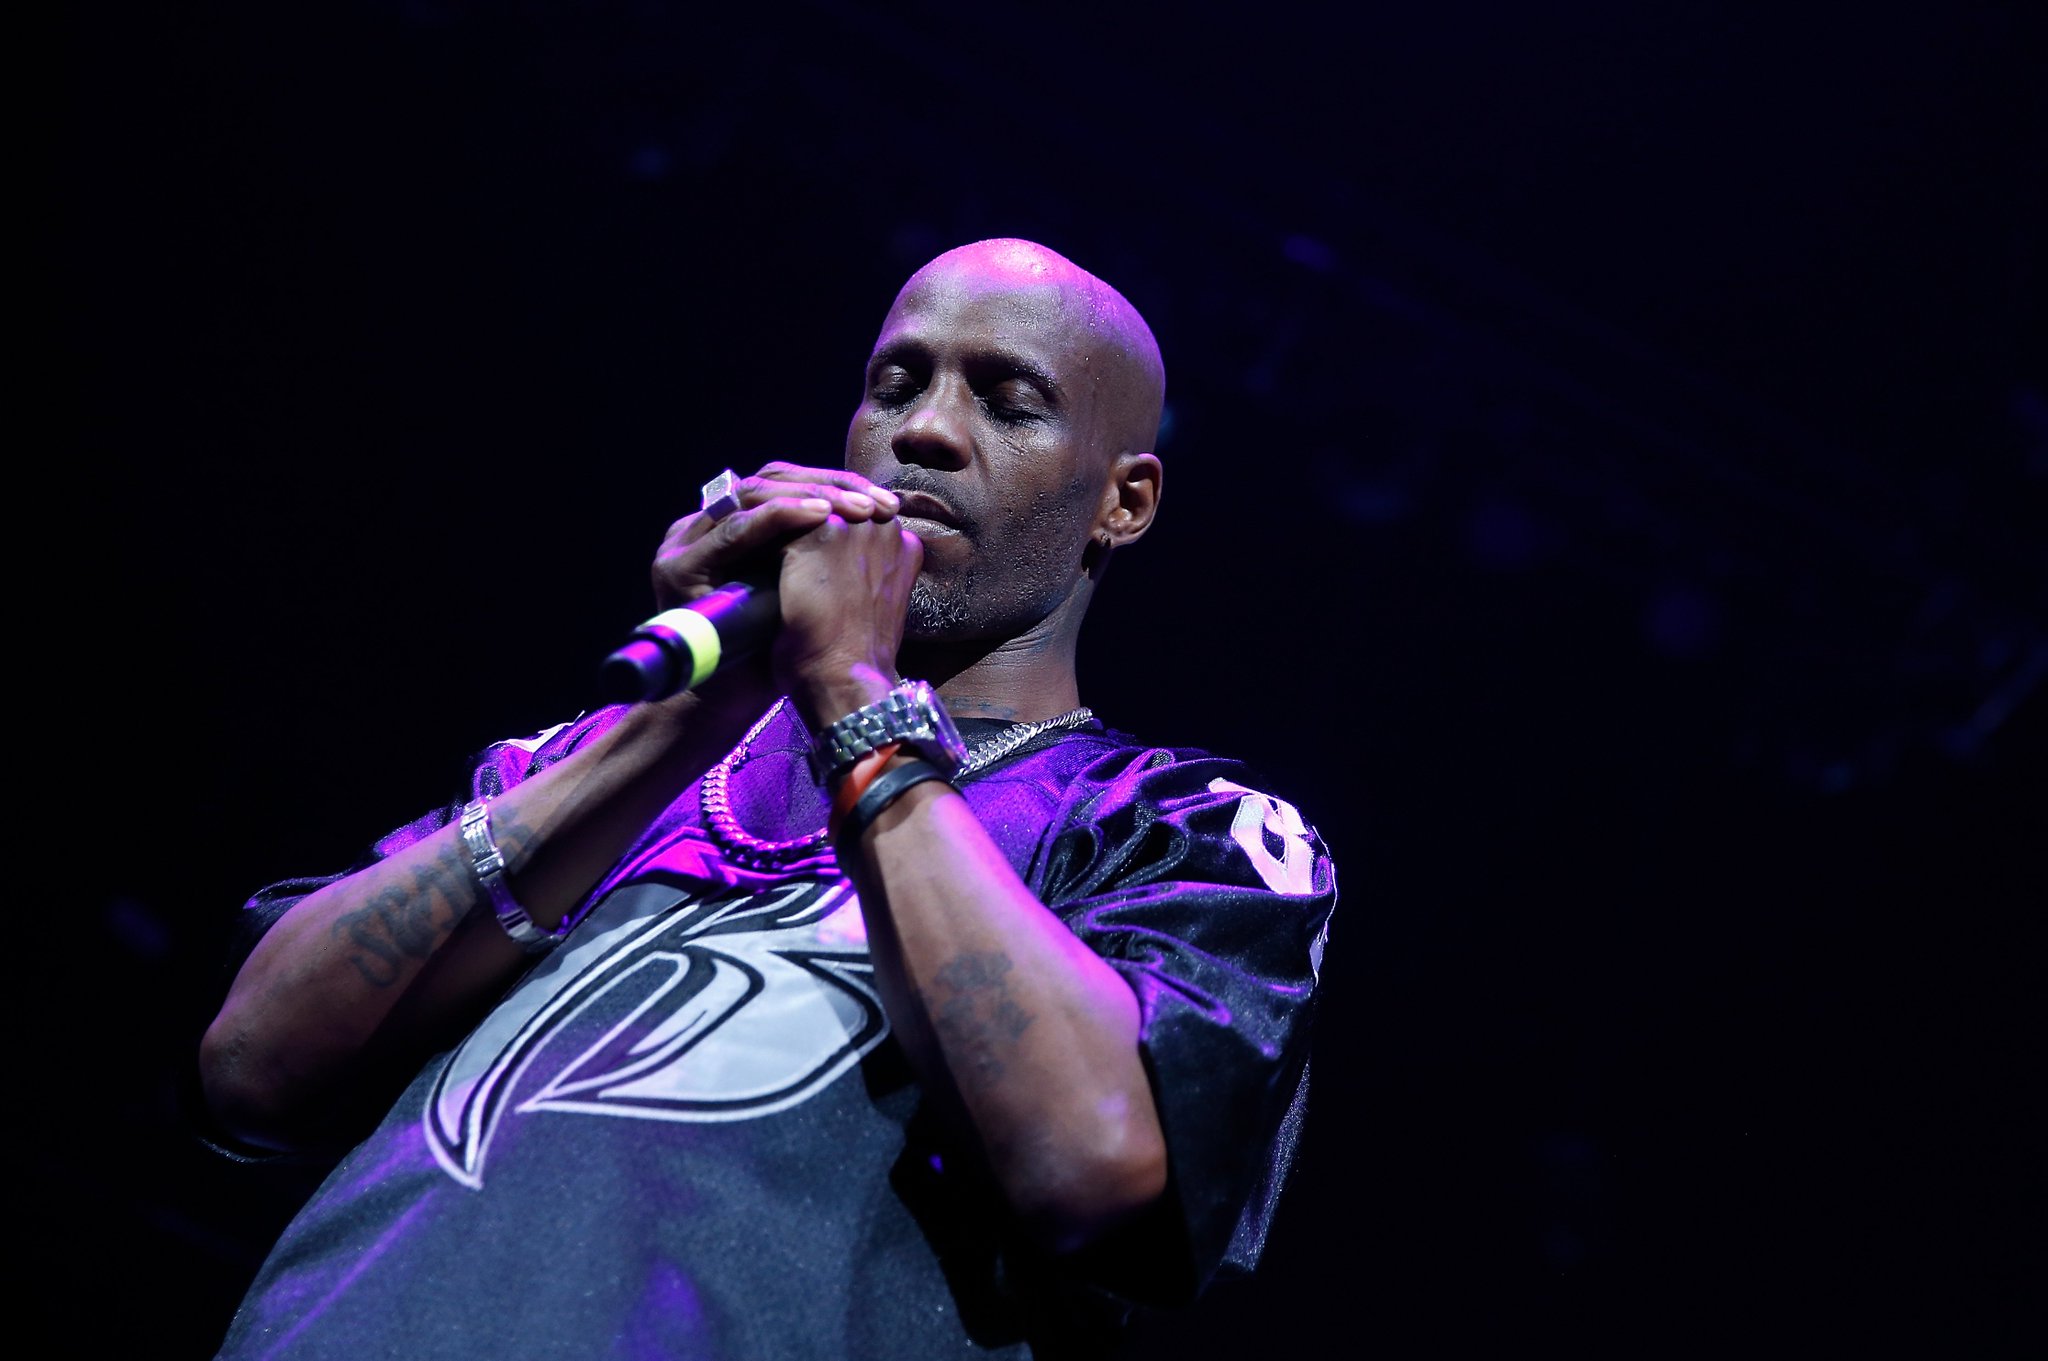 Join us in wishing DMX a happy birthday! 